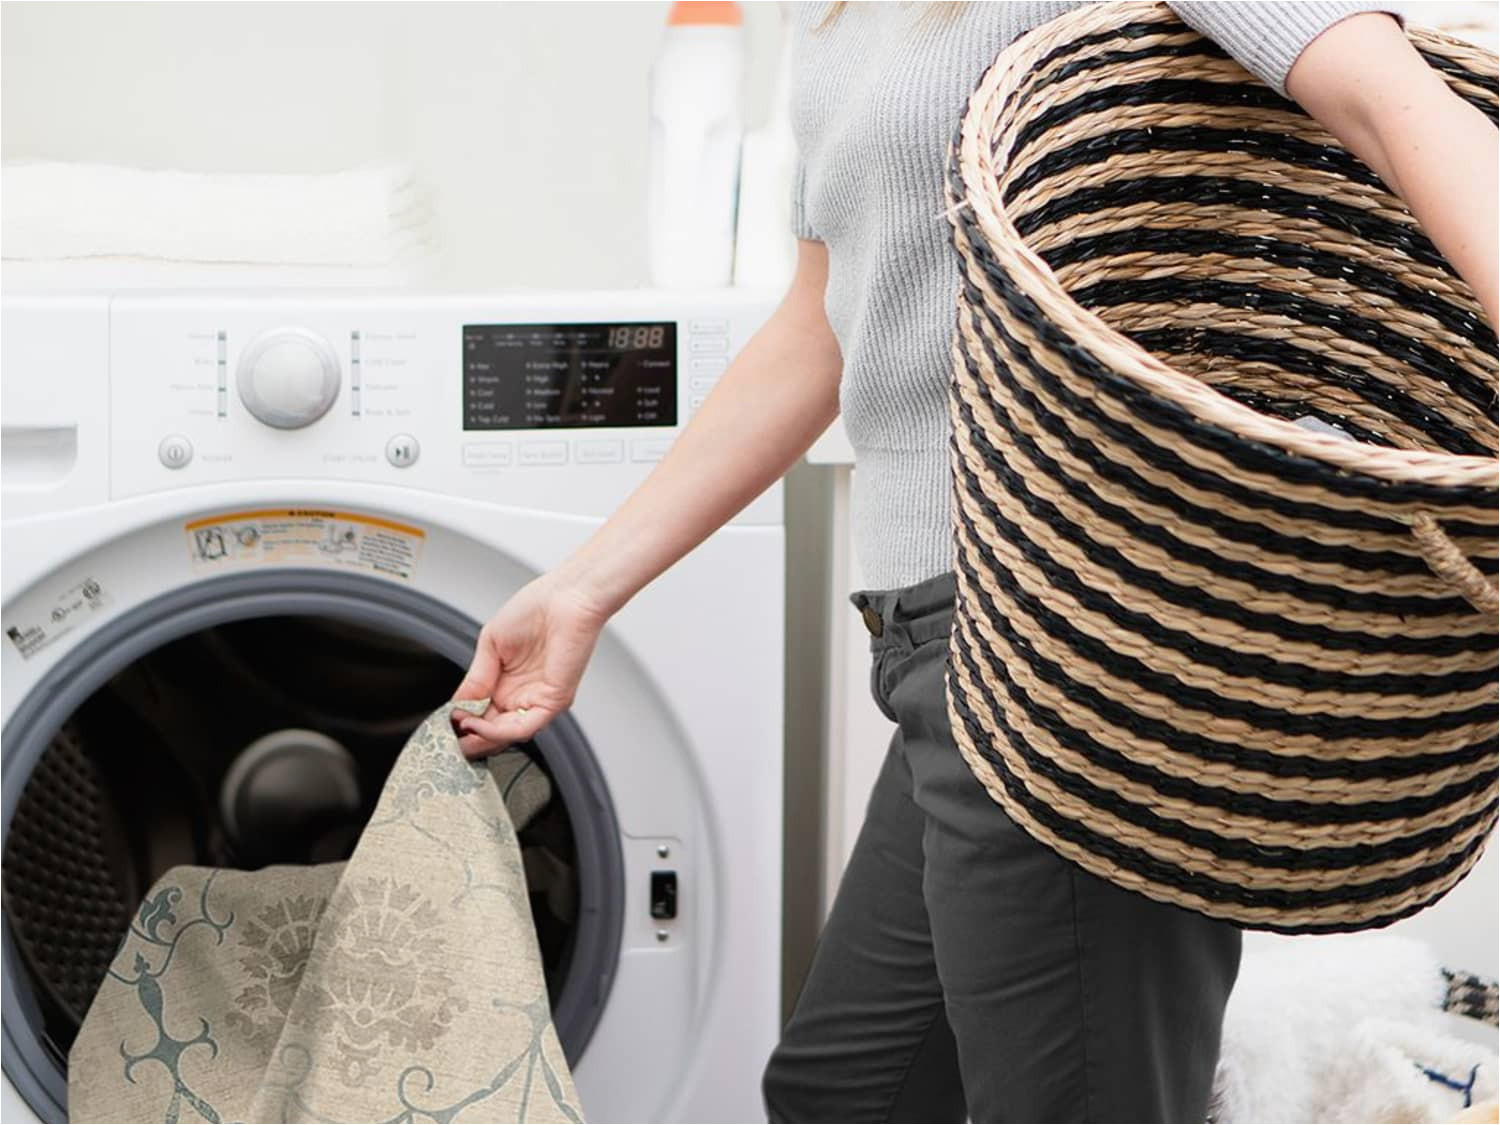 Washing area Rug at Laundromat Can You Clean A Rug In the Washing Machine? You Can Wash these and …